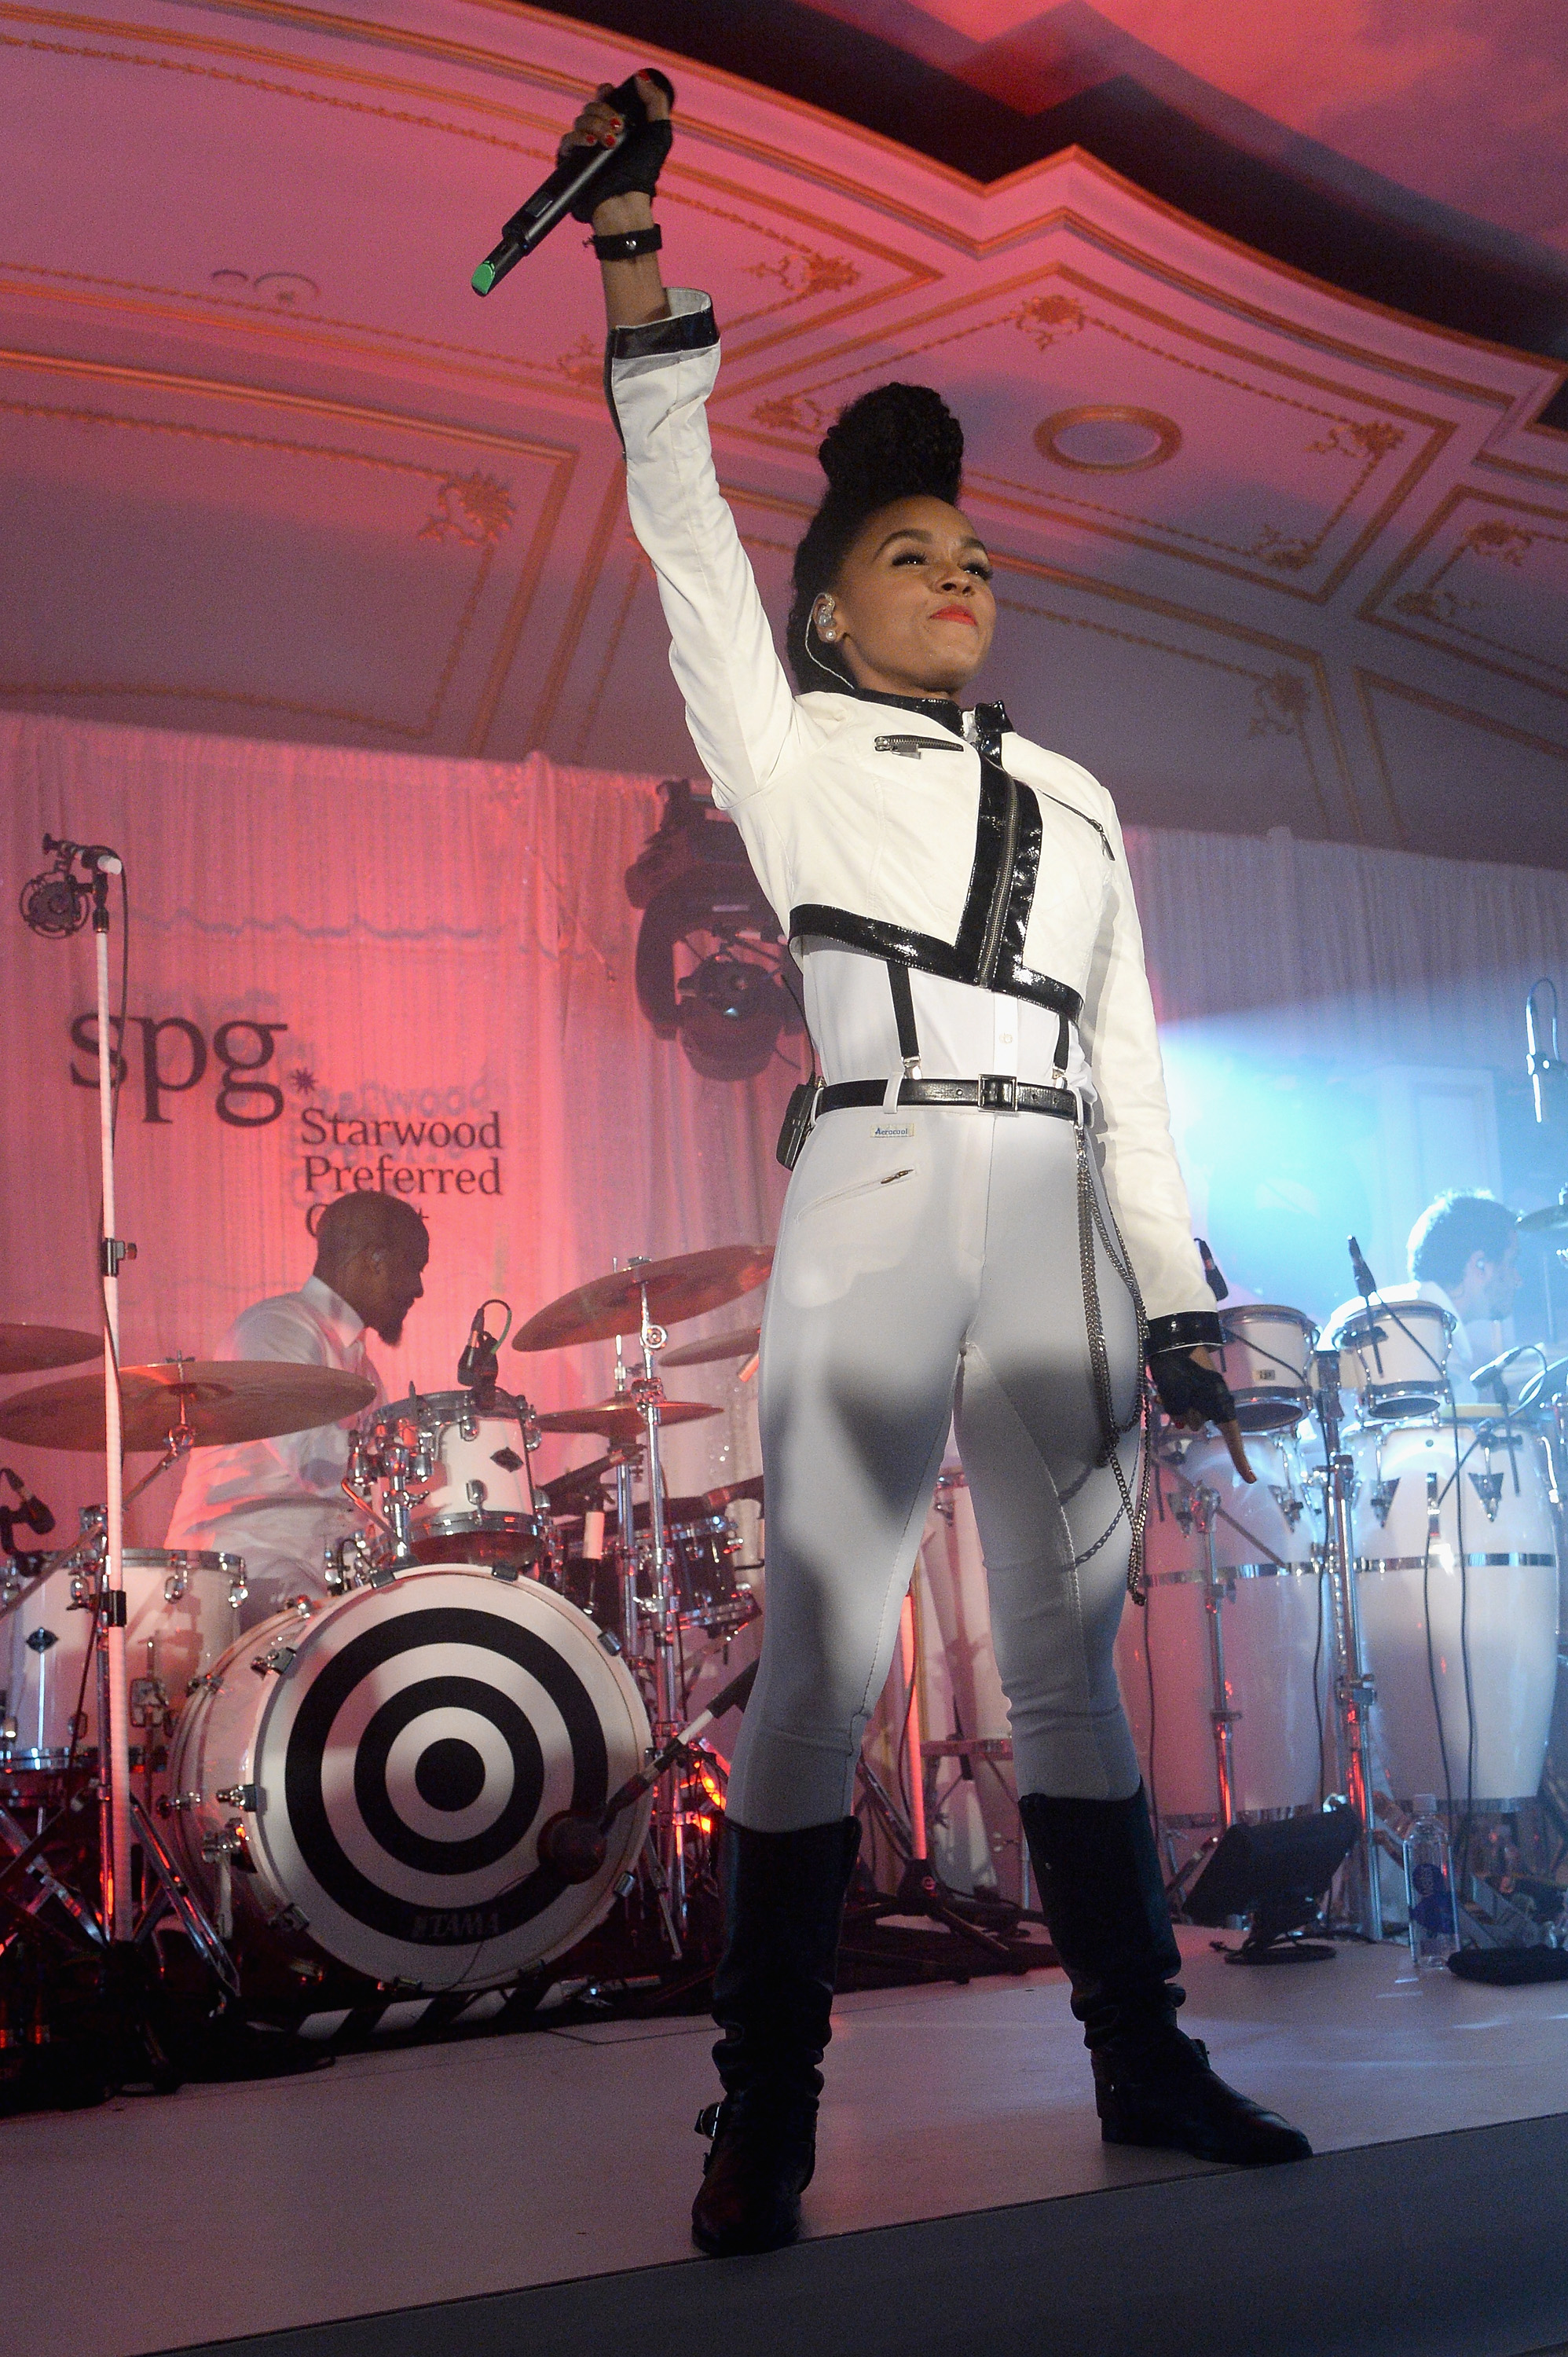 Janelle Monae Performs An Intimate Show At The St. Regis New York As Part Of Starwood Preferred Guest's Hear The Music, See The World Concert Series On June 19